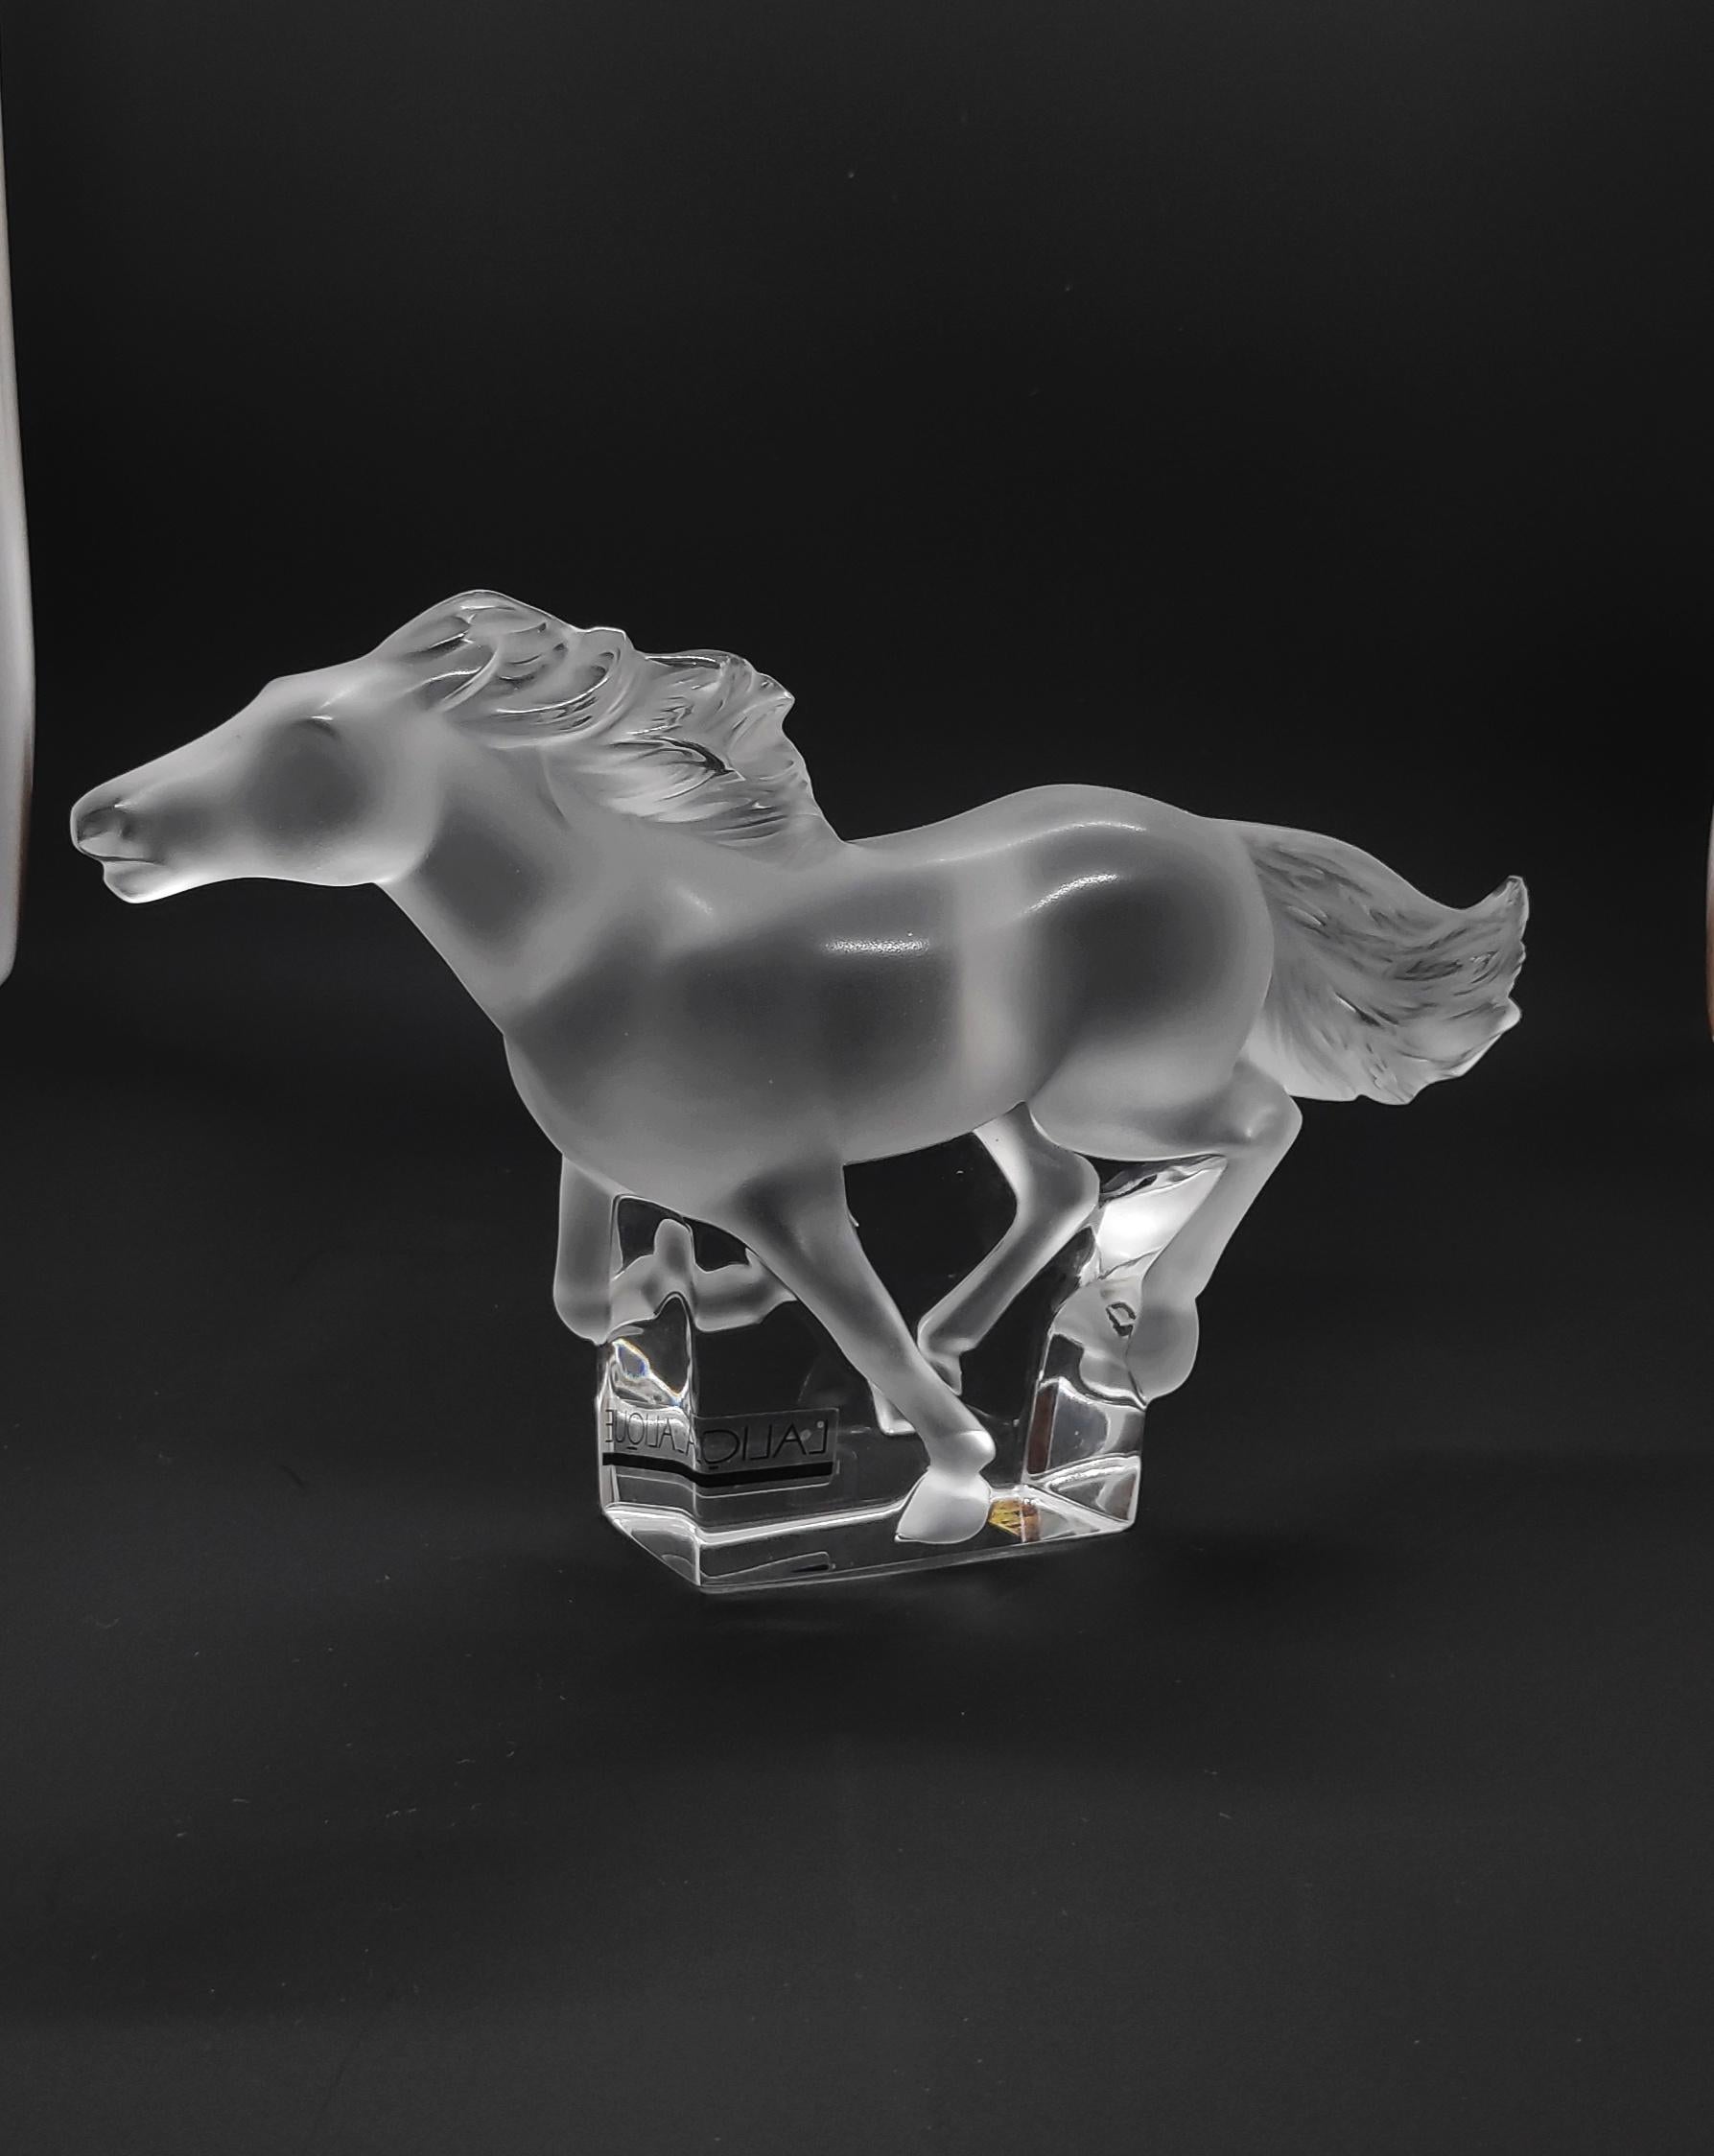 Lalique crystal horse Kazak made in France, circa 1990. Measure: H 12 cm.
we can be said that René Lalique products are among the most coveted collector's items today. Their opulence, brilliance and voluptuousness distinguish them from any other